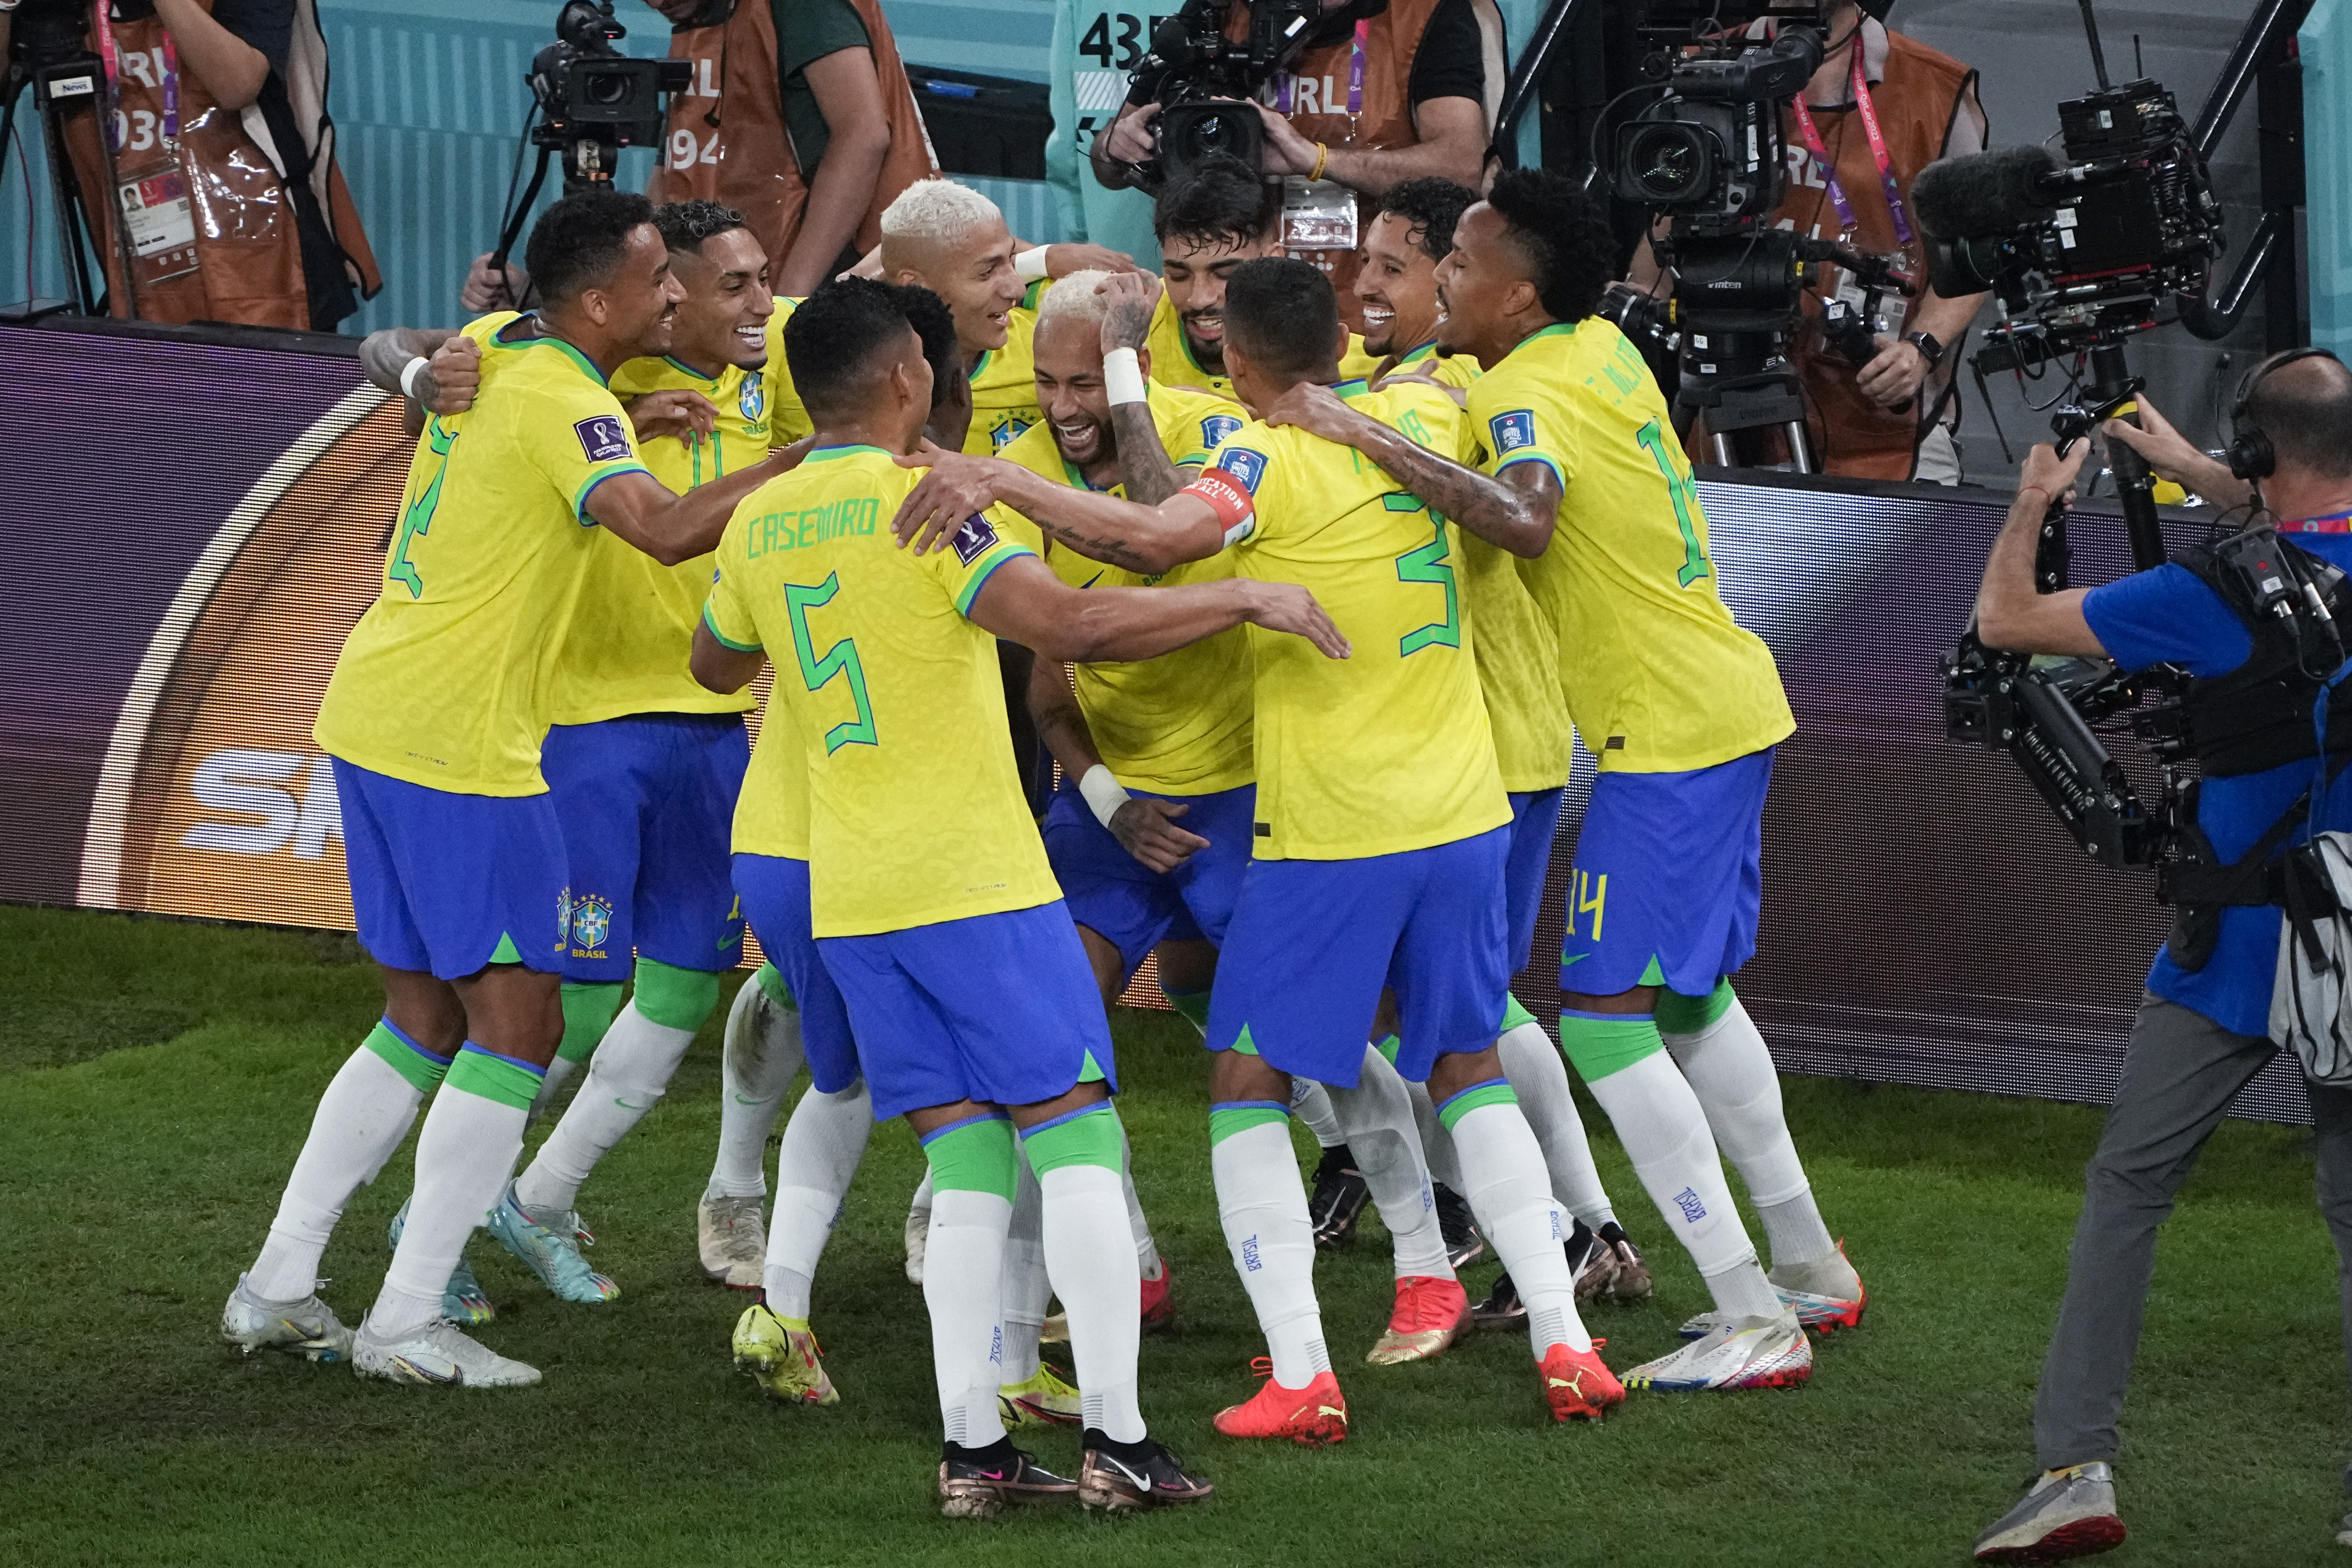 Brazil World Cup 2022 squad, predicted line-up versus South Korea